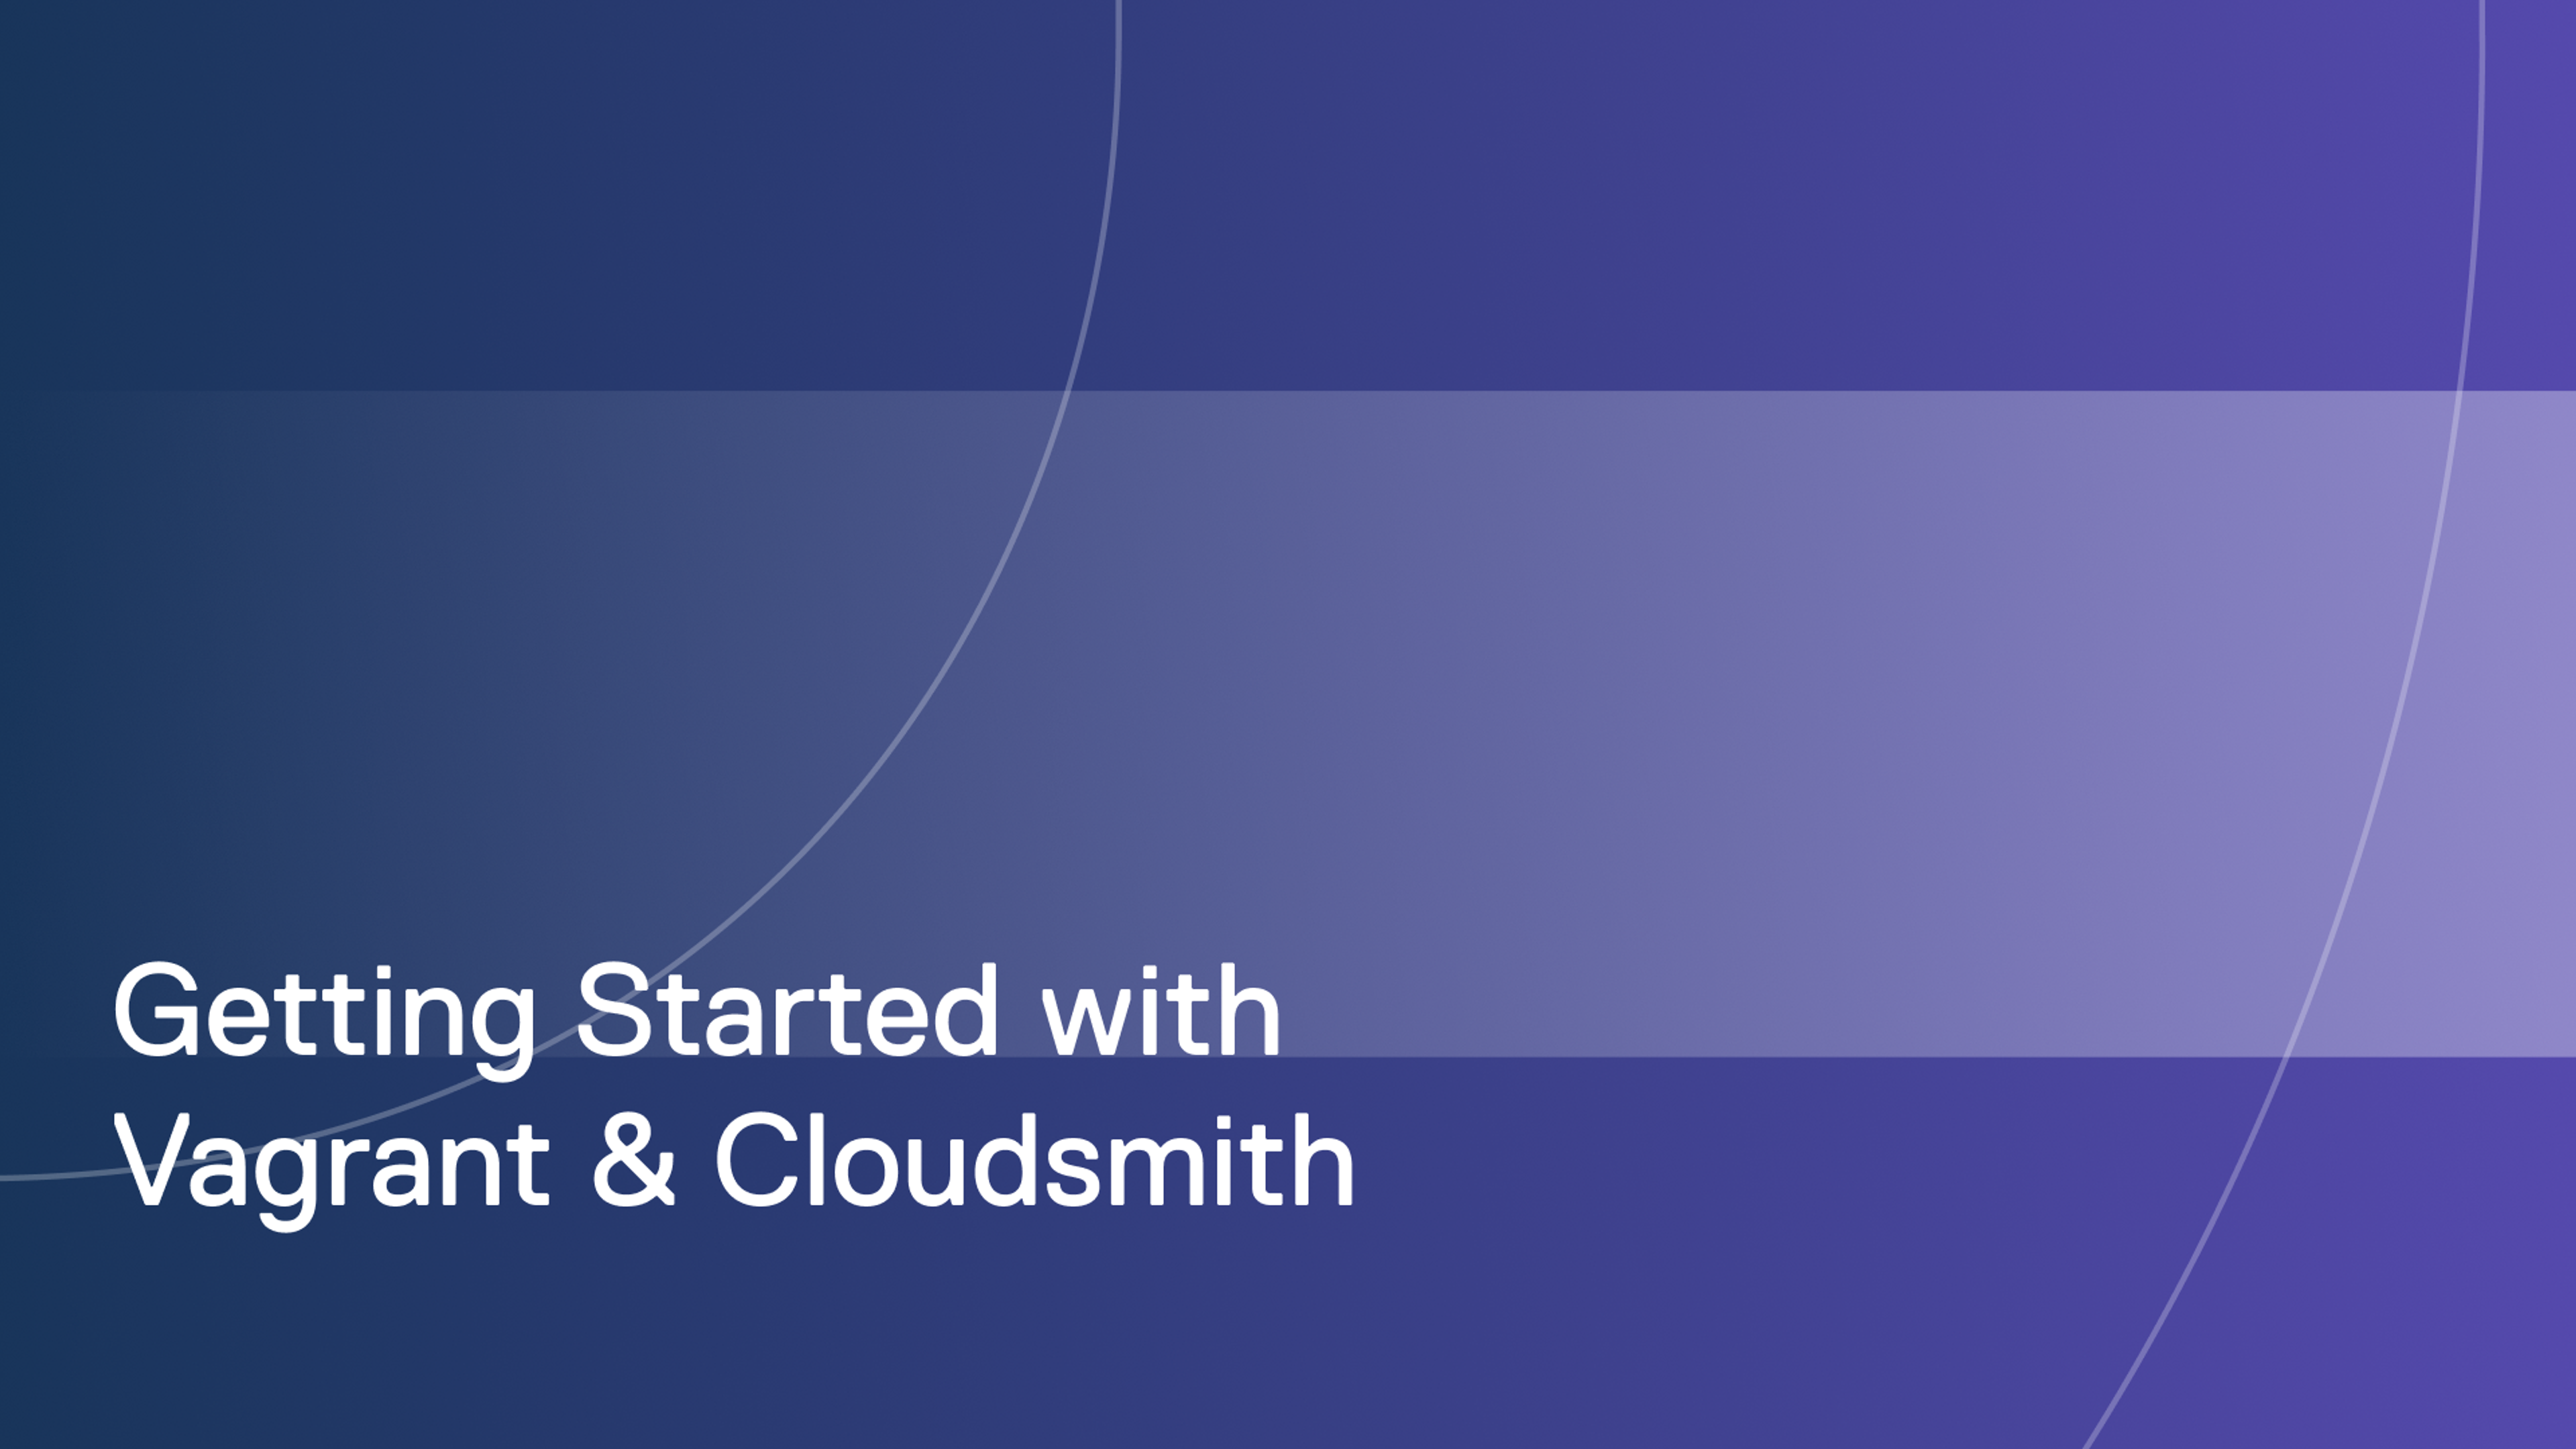 Getting started with Vagrant and Cloudsmith